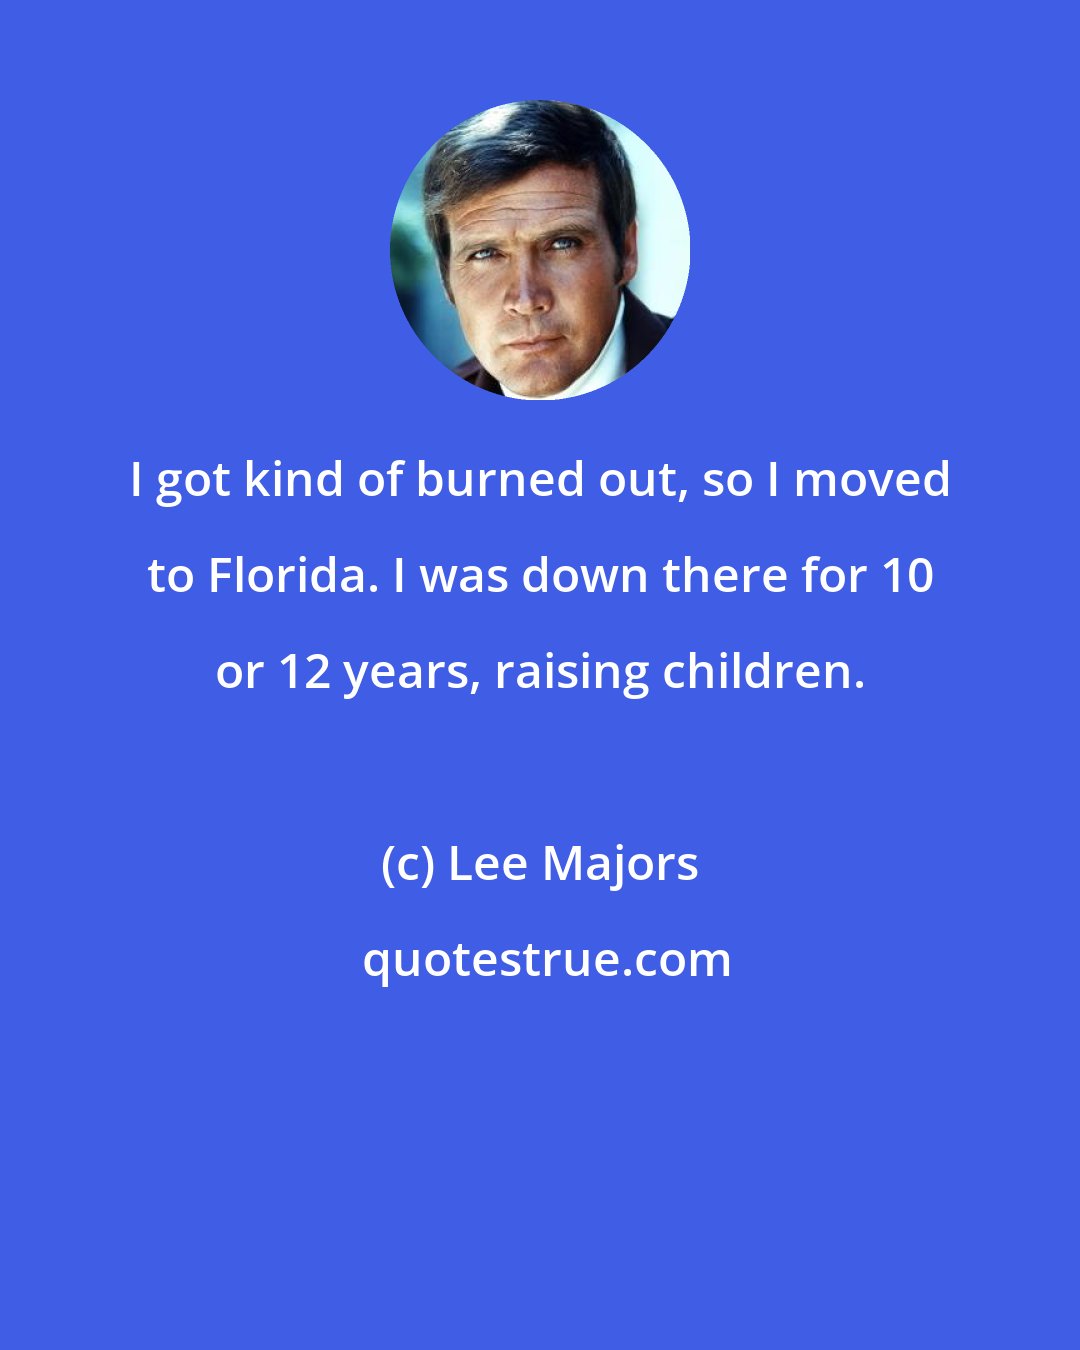 Lee Majors: I got kind of burned out, so I moved to Florida. I was down there for 10 or 12 years, raising children.